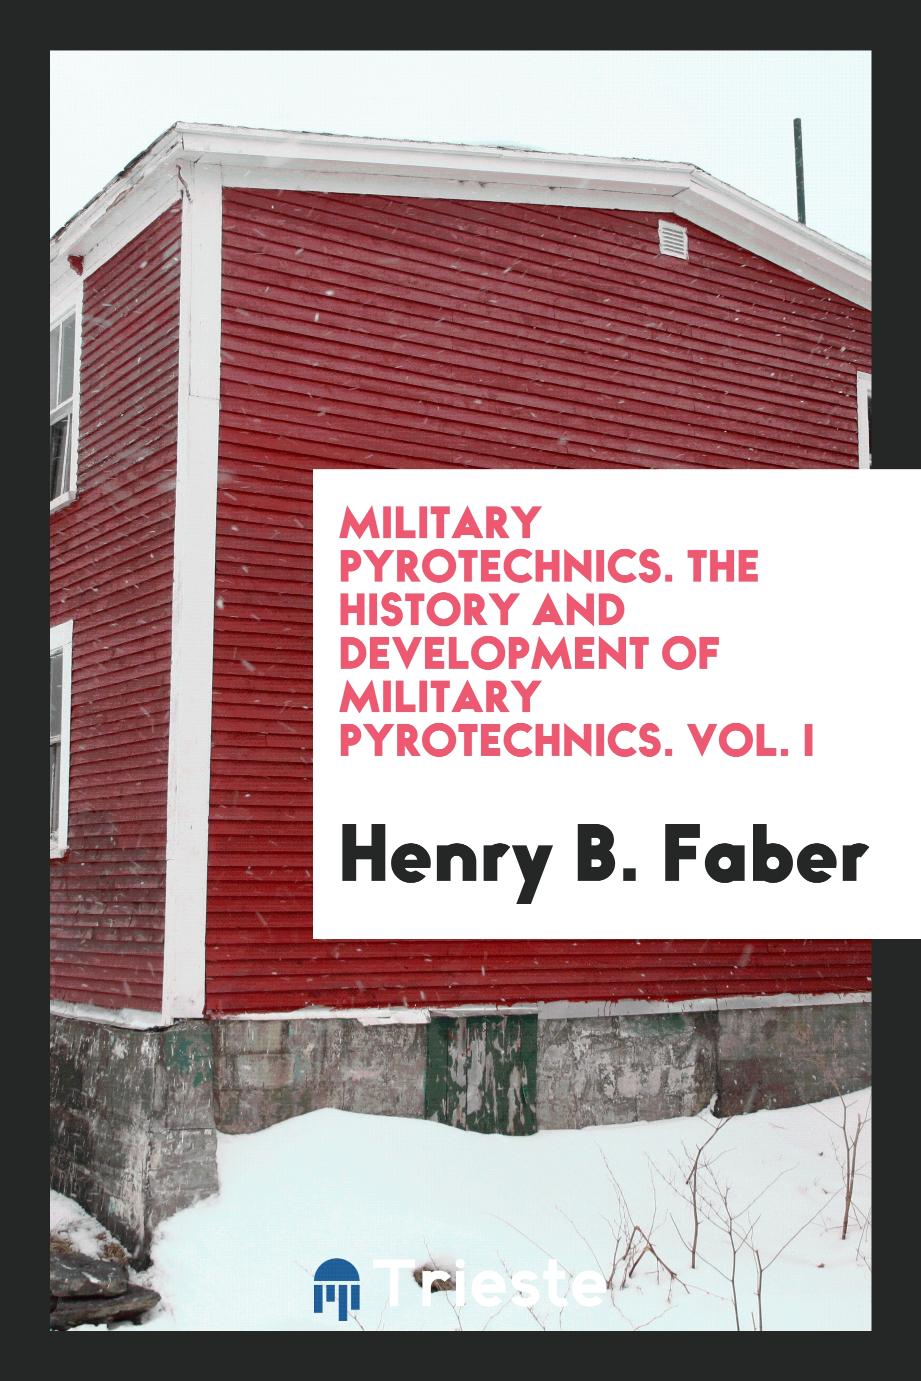 Military Pyrotechnics. The History and Development of Military Pyrotechnics. Vol. I